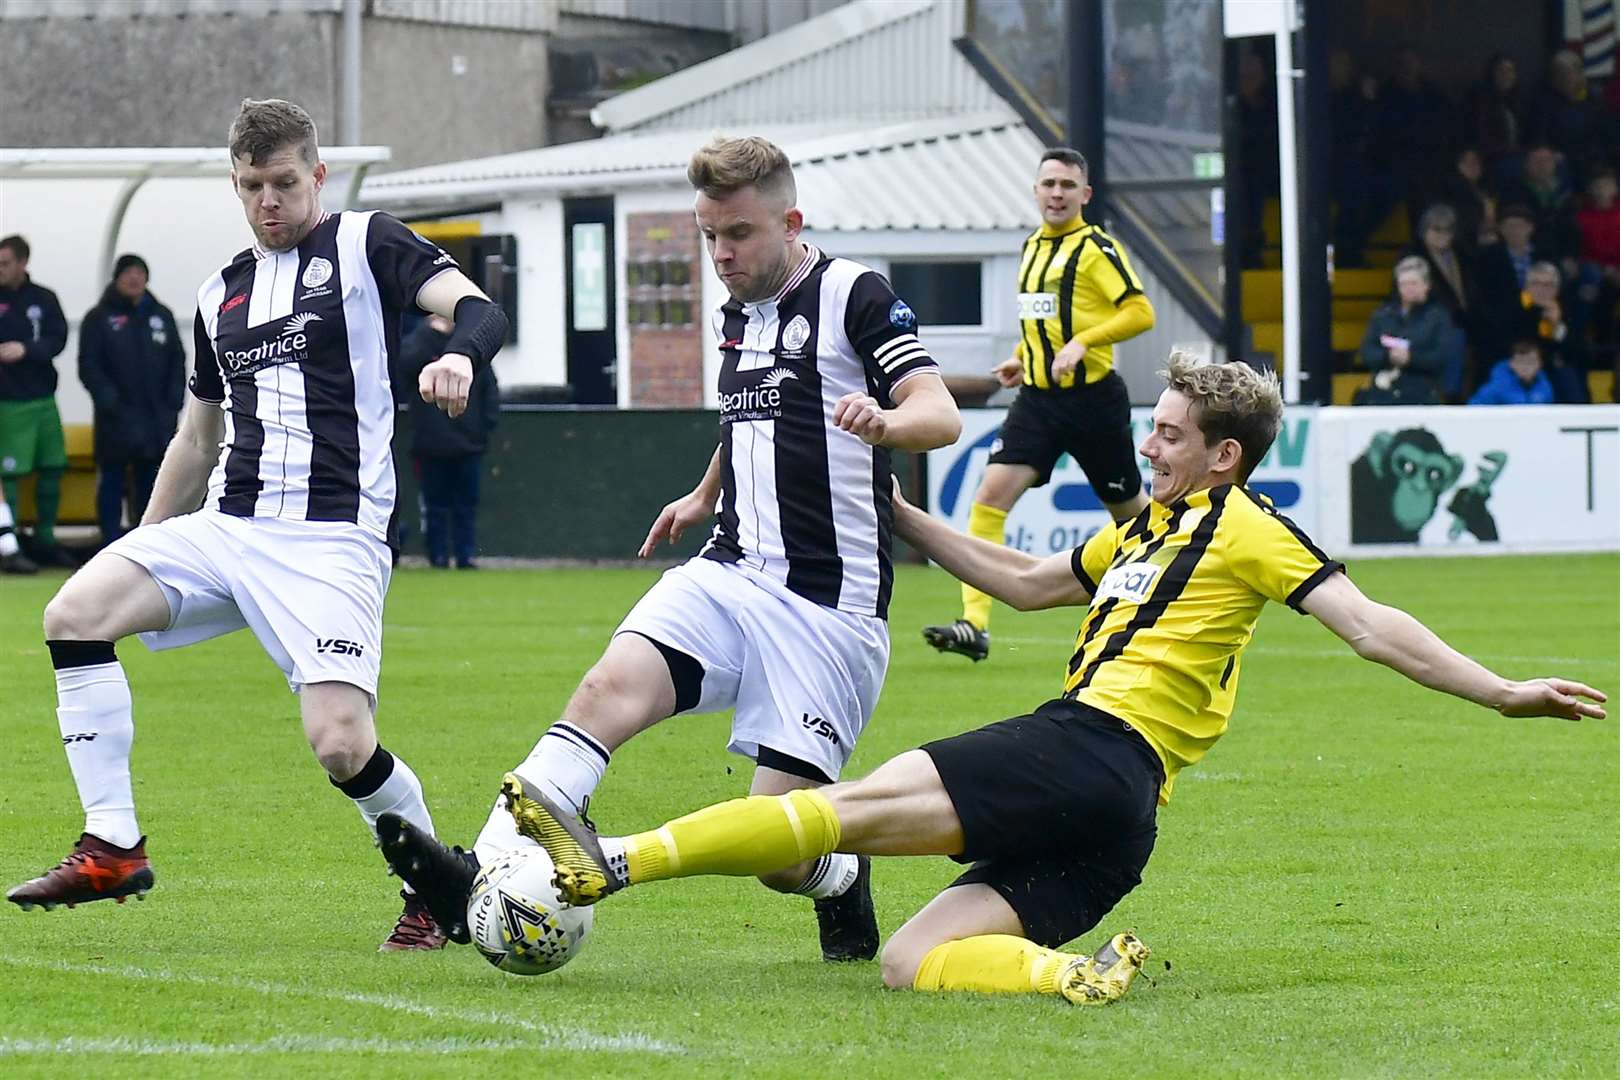 Alan Farquhar stopping a Nairn County attack during a Highland League match at Station Park. Picture: Mel Roger